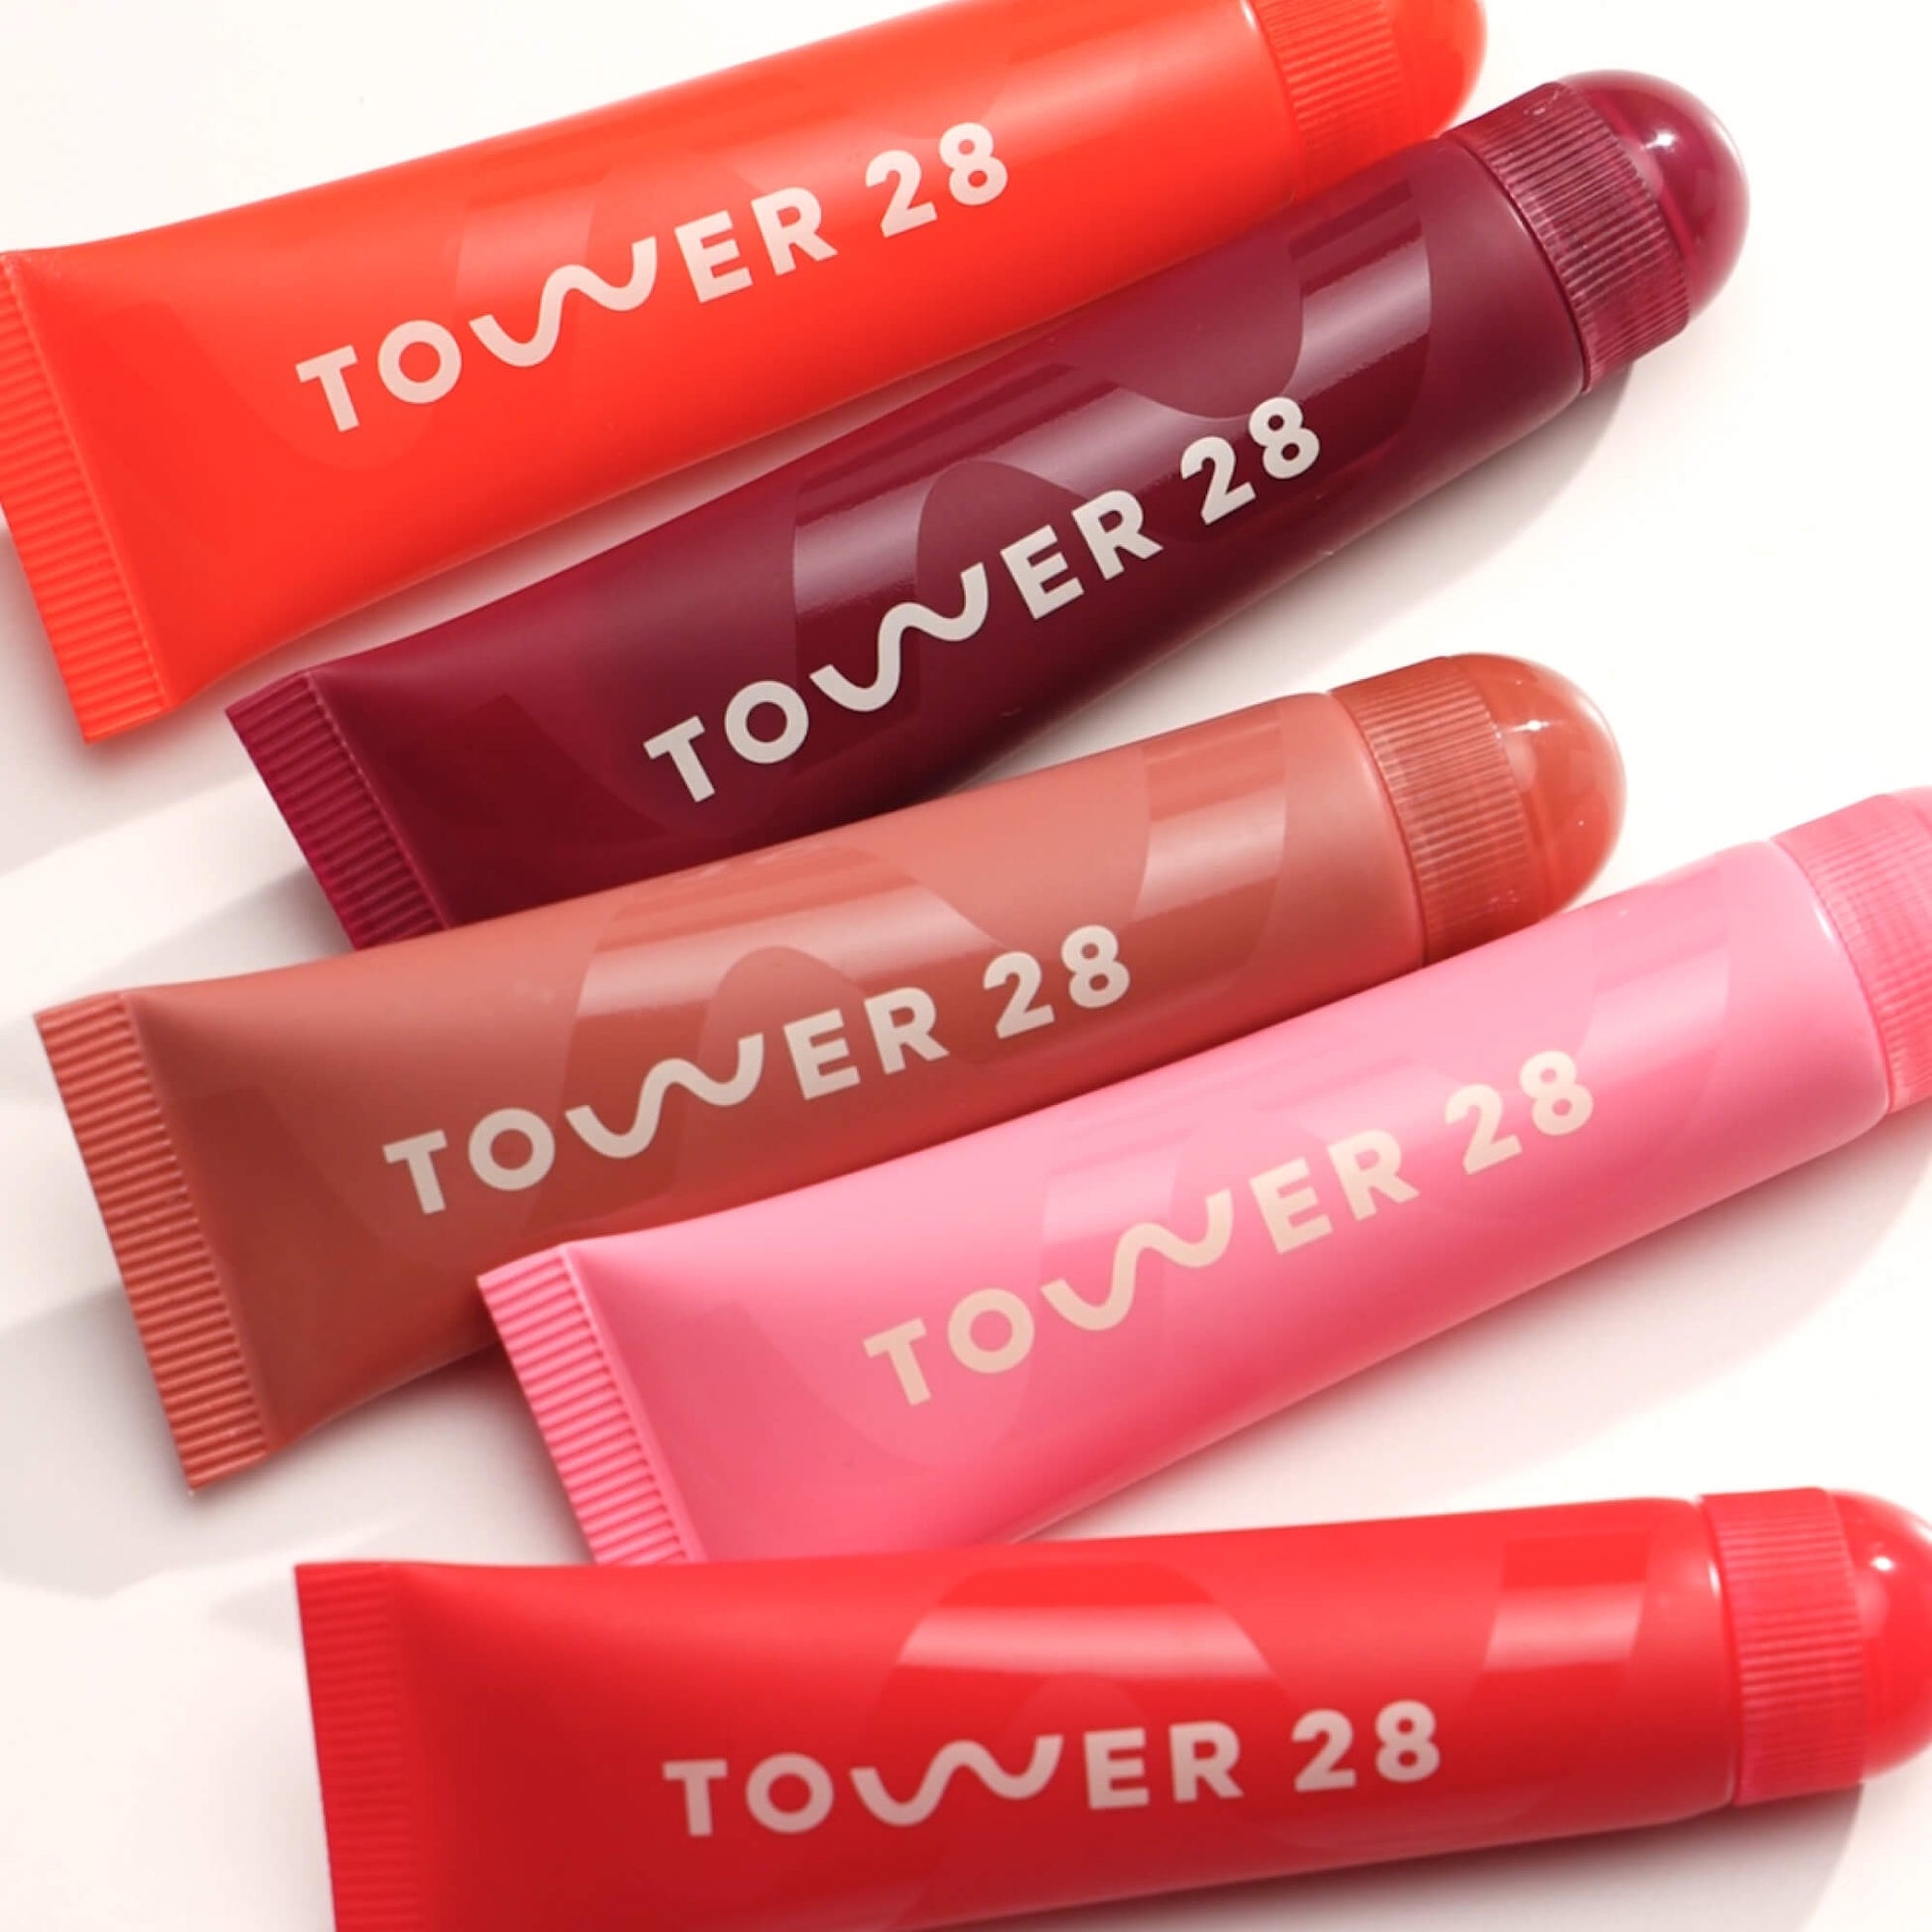 [Family group photo of the Tower 28 Beauty LipSoftie™ Lip Treatment on white